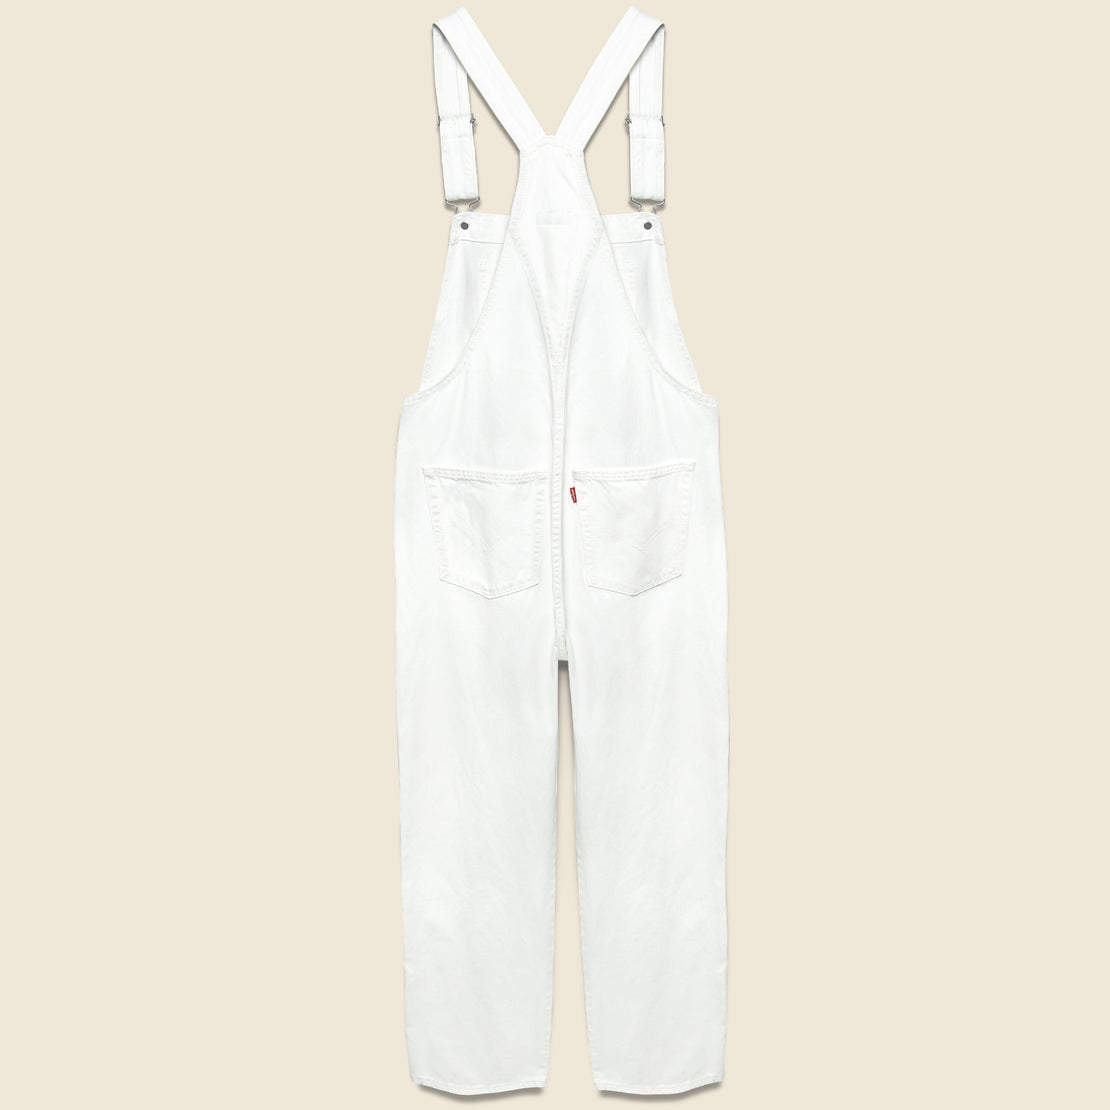 Vintage Overall - White Lie - Levis Premium - STAG Provisions - W - Onepiece - Overalls